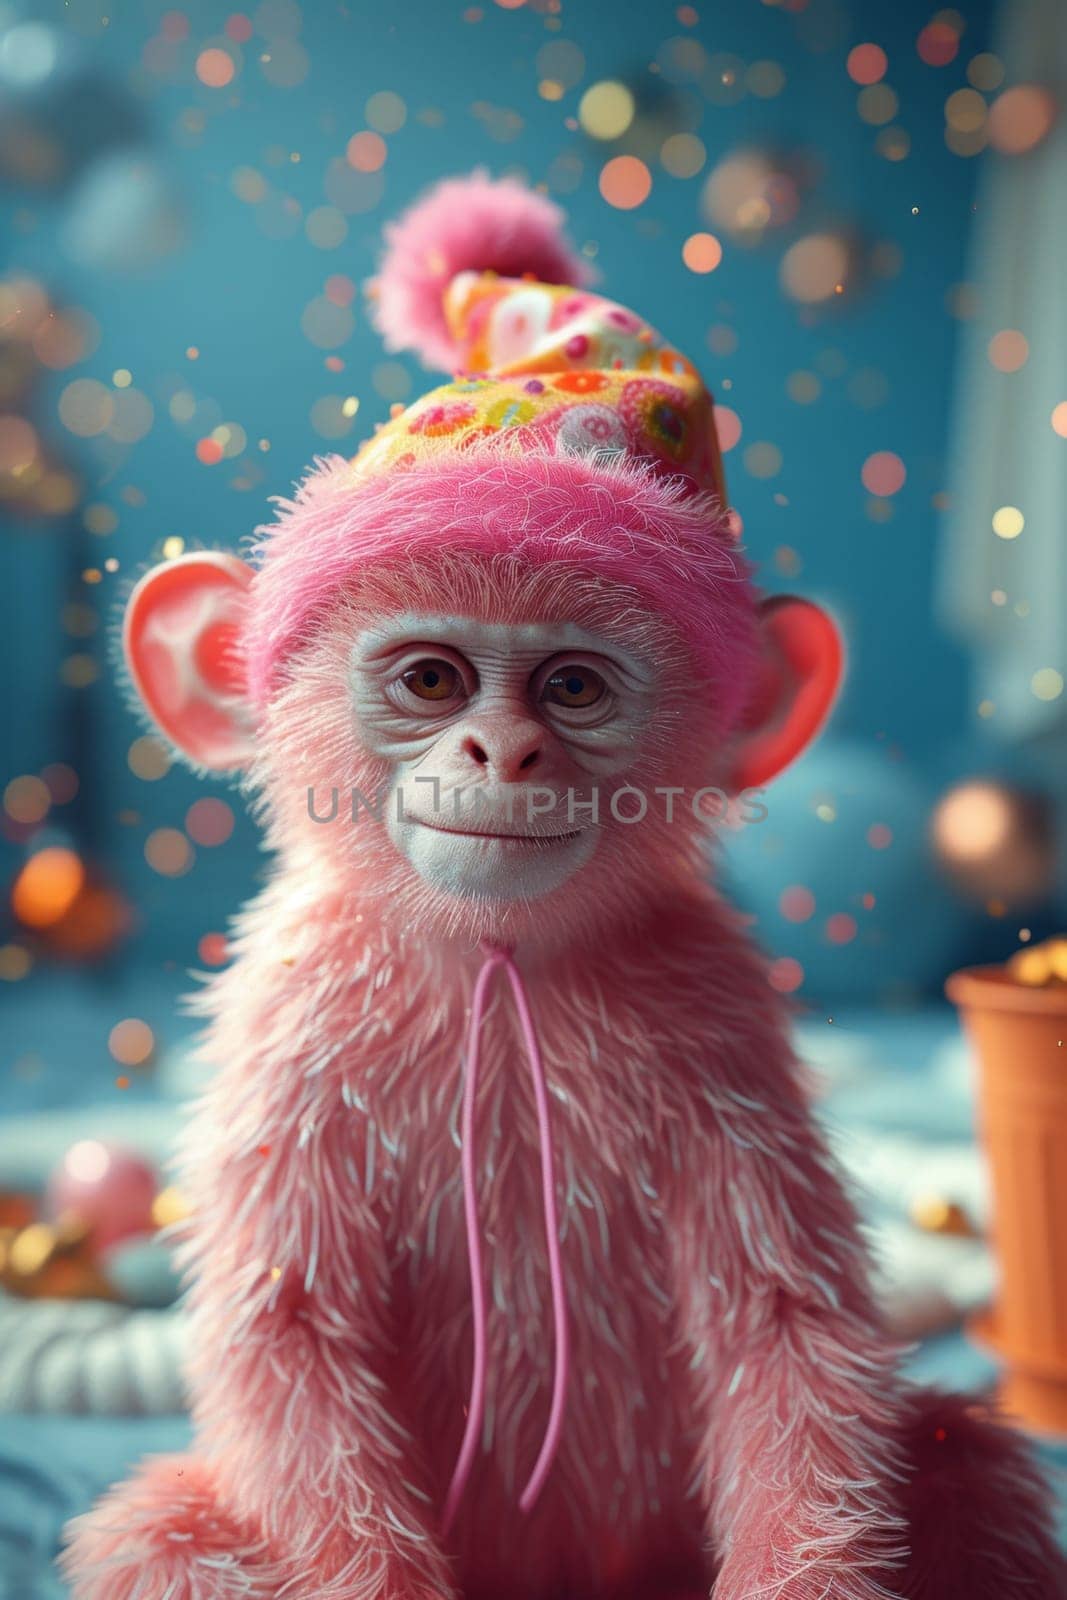 A pink monkey in a warm hat sitting in a blue interior.